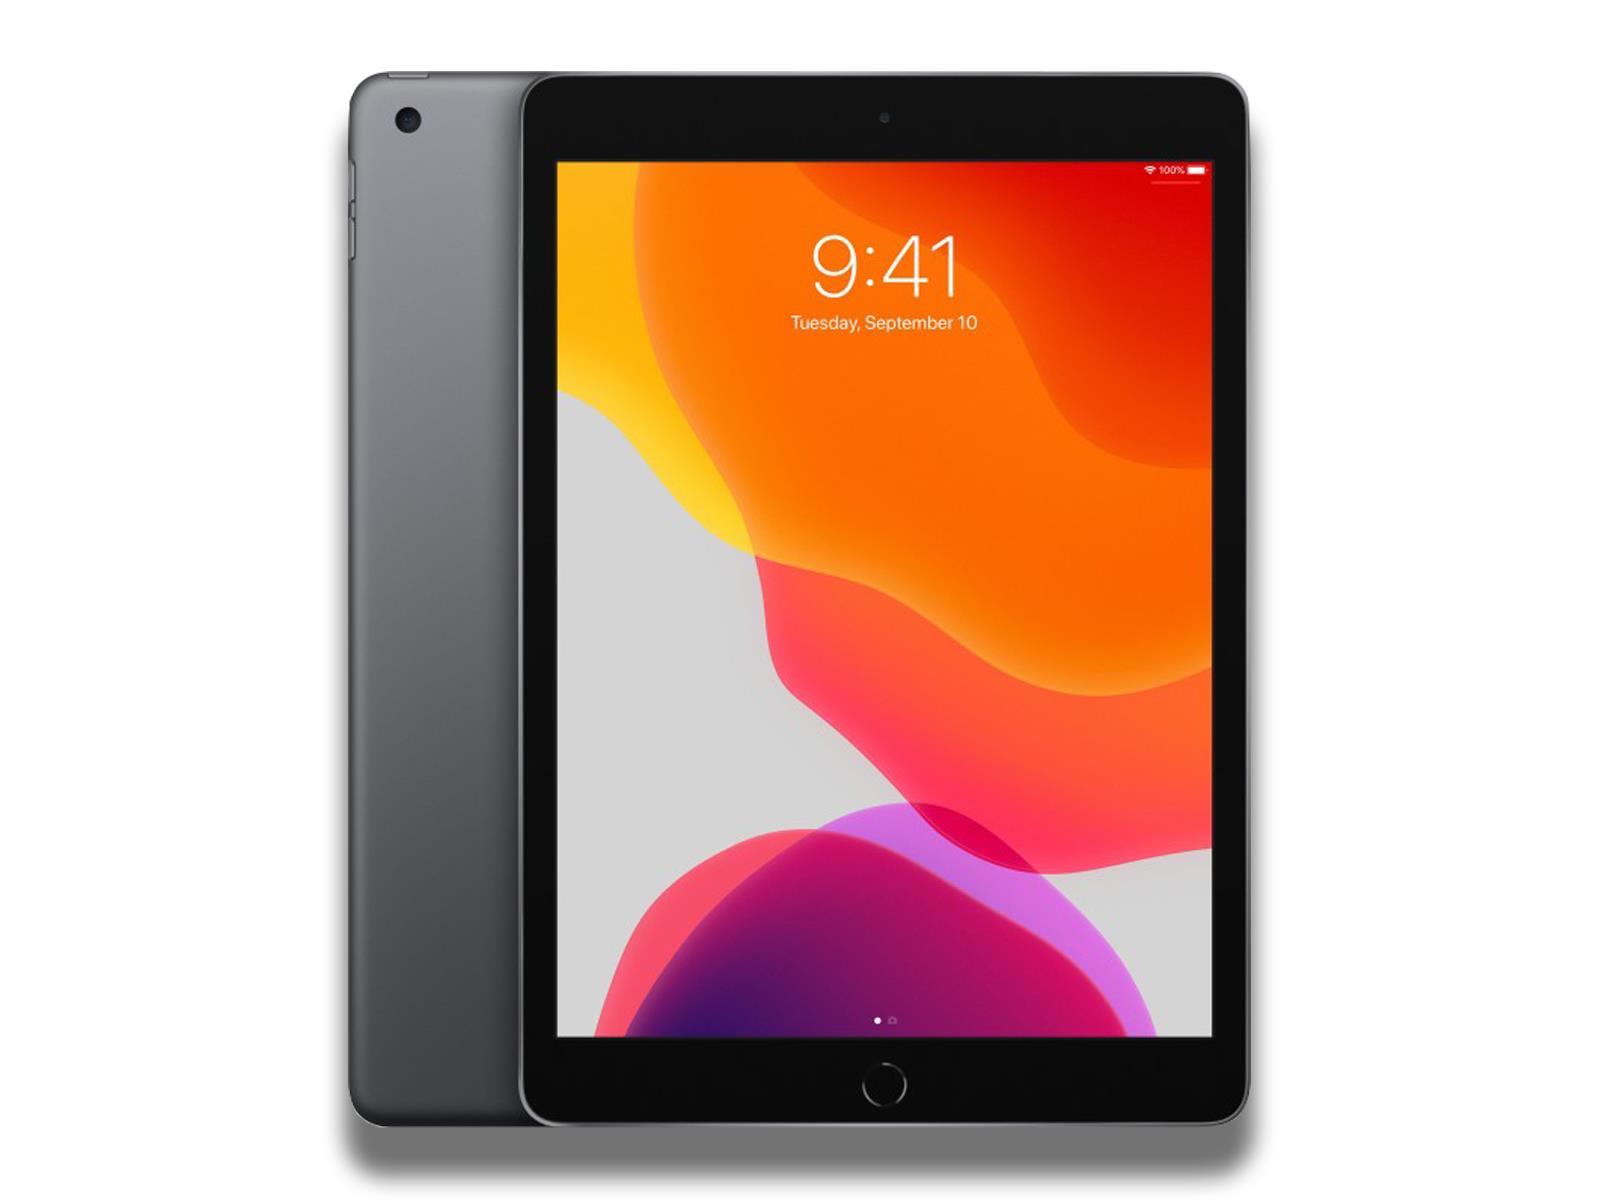 Image shows a front and back view of the Space Grey iPad 7th Gen